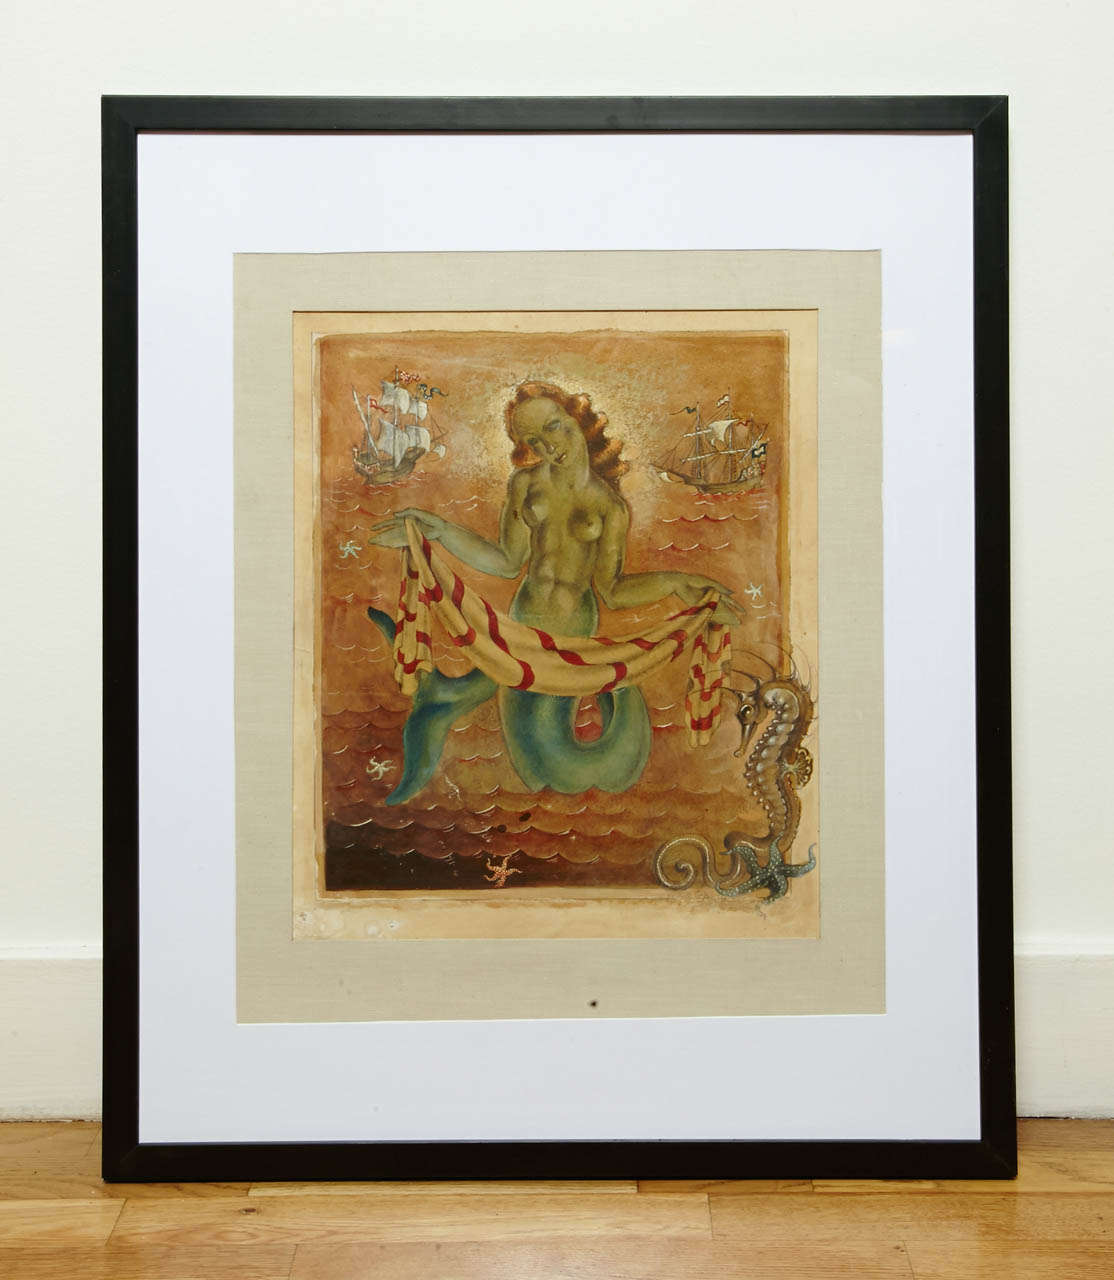 Varnished oil on paper by Belgium painter Anto Carte (1886 - 1956) titled 'Sirene'.
Signed in the bottom right and dated 31. Anto Carte cannot be associated to a specific painting school; his work evolves between Symbolism and Naturalism. At the